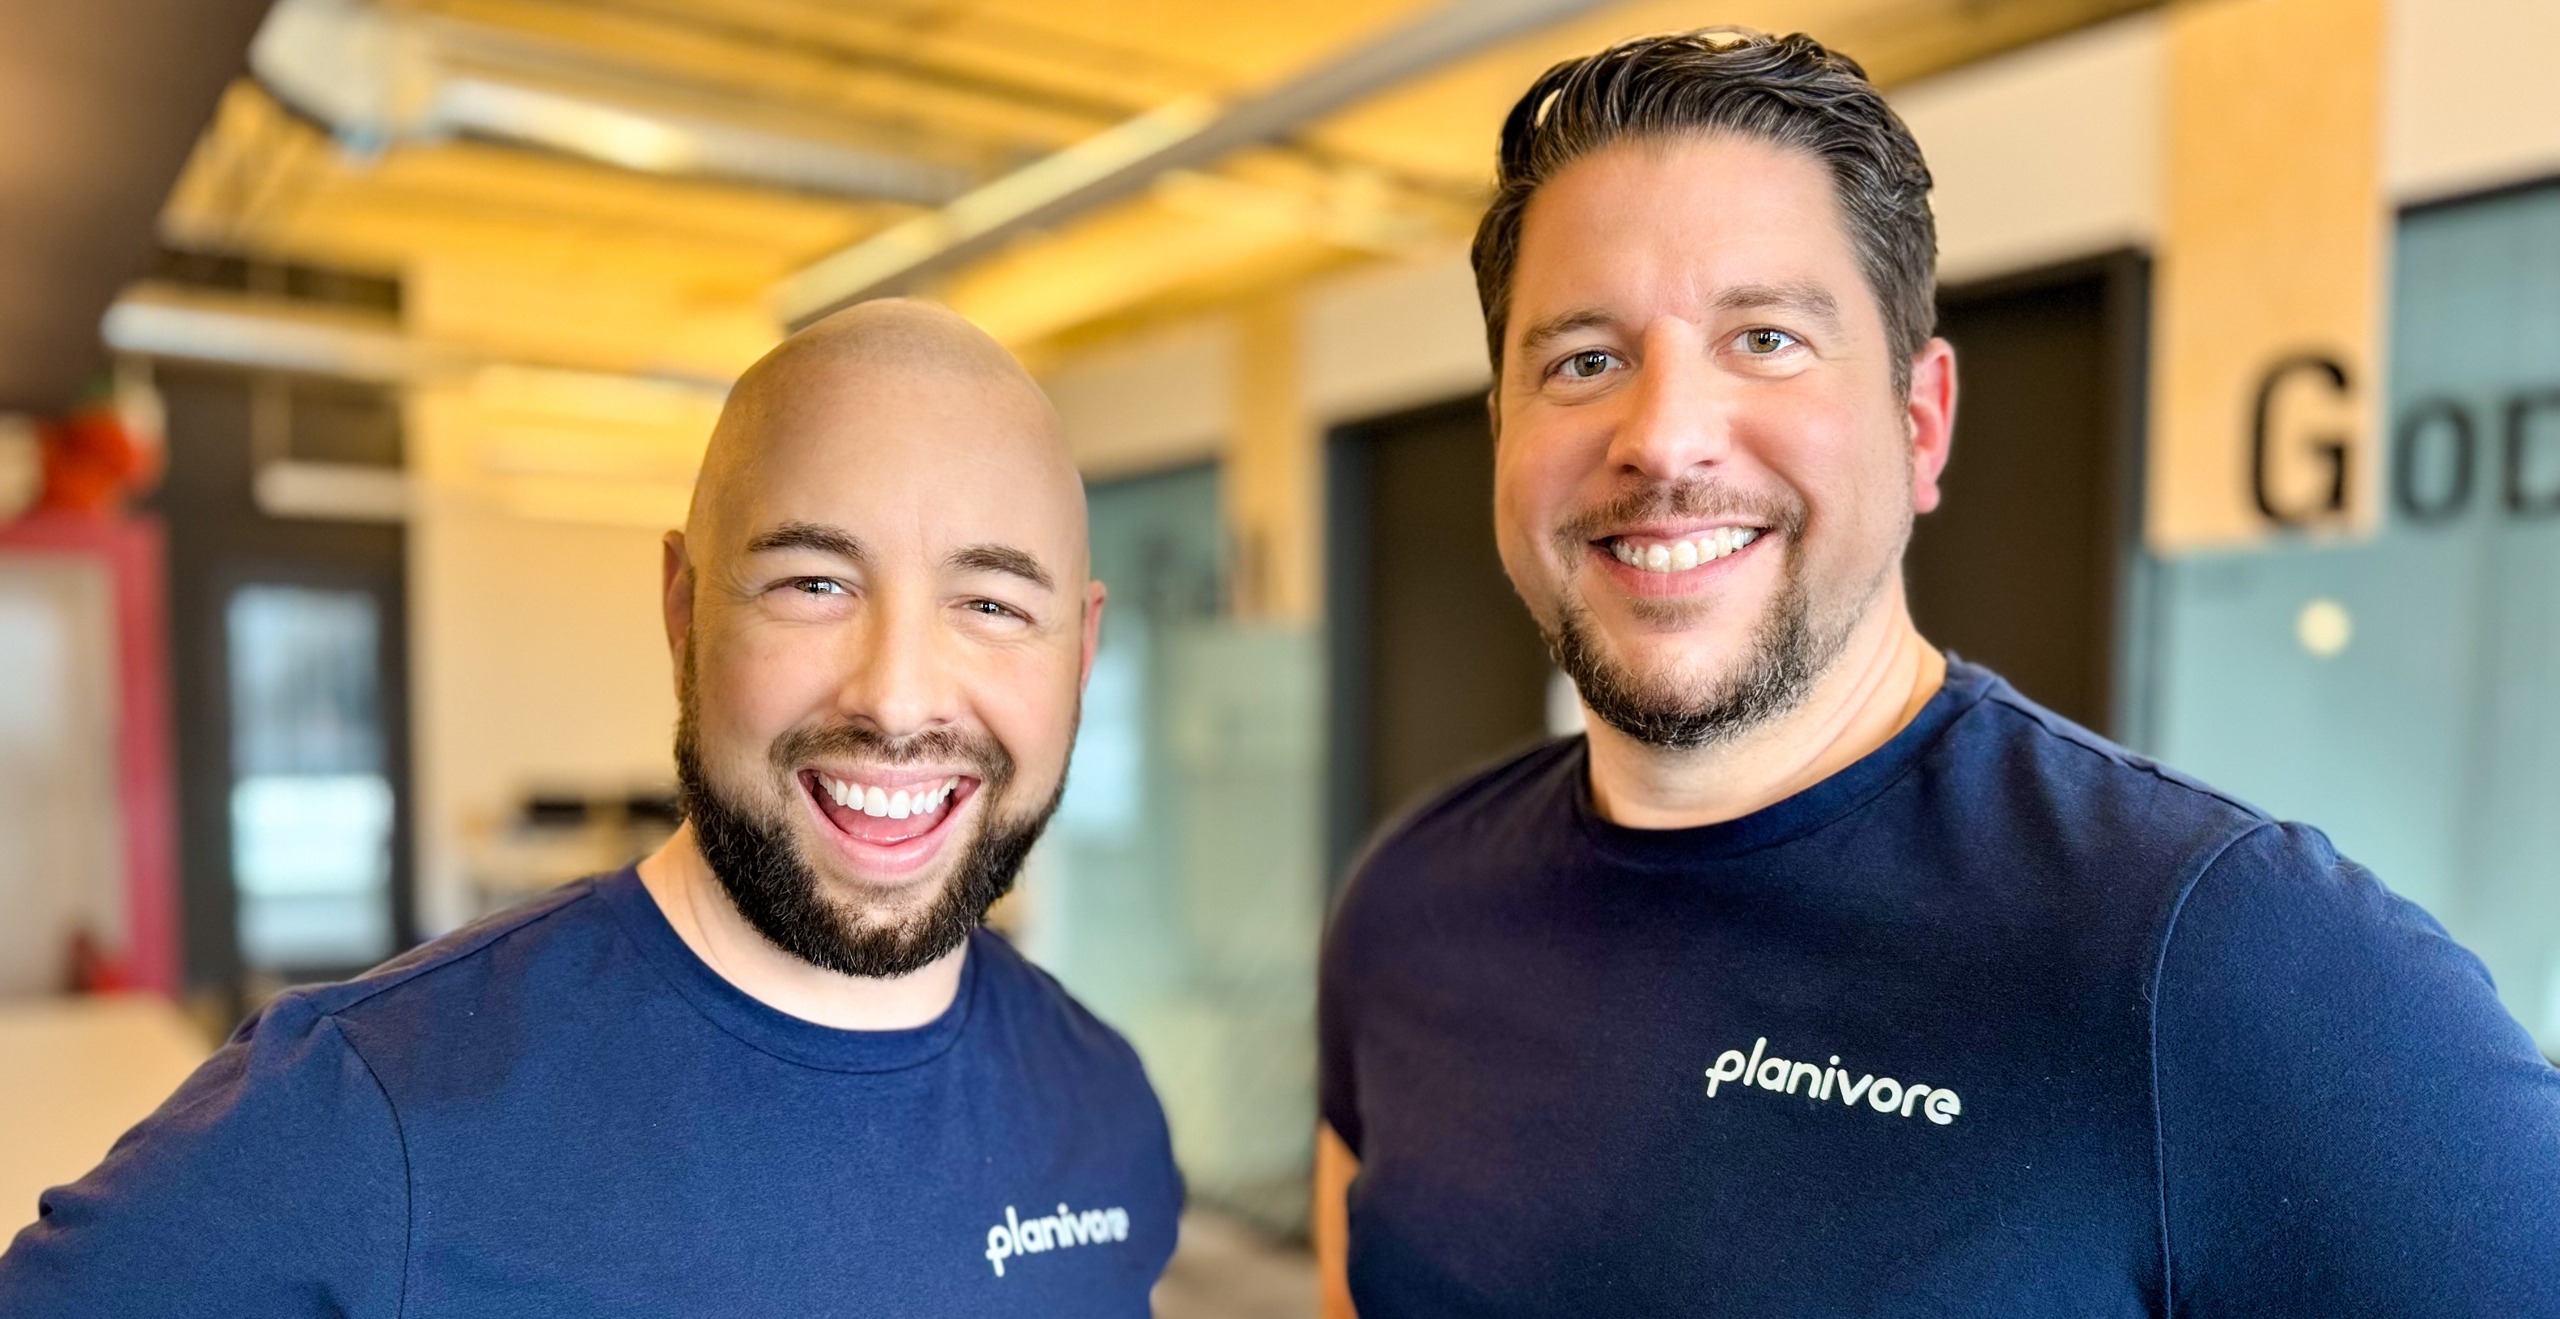 Steve Cholette and Alexandre Jalbert, co-founders of Mediavore as well as the technological solutions dvore and planivore.